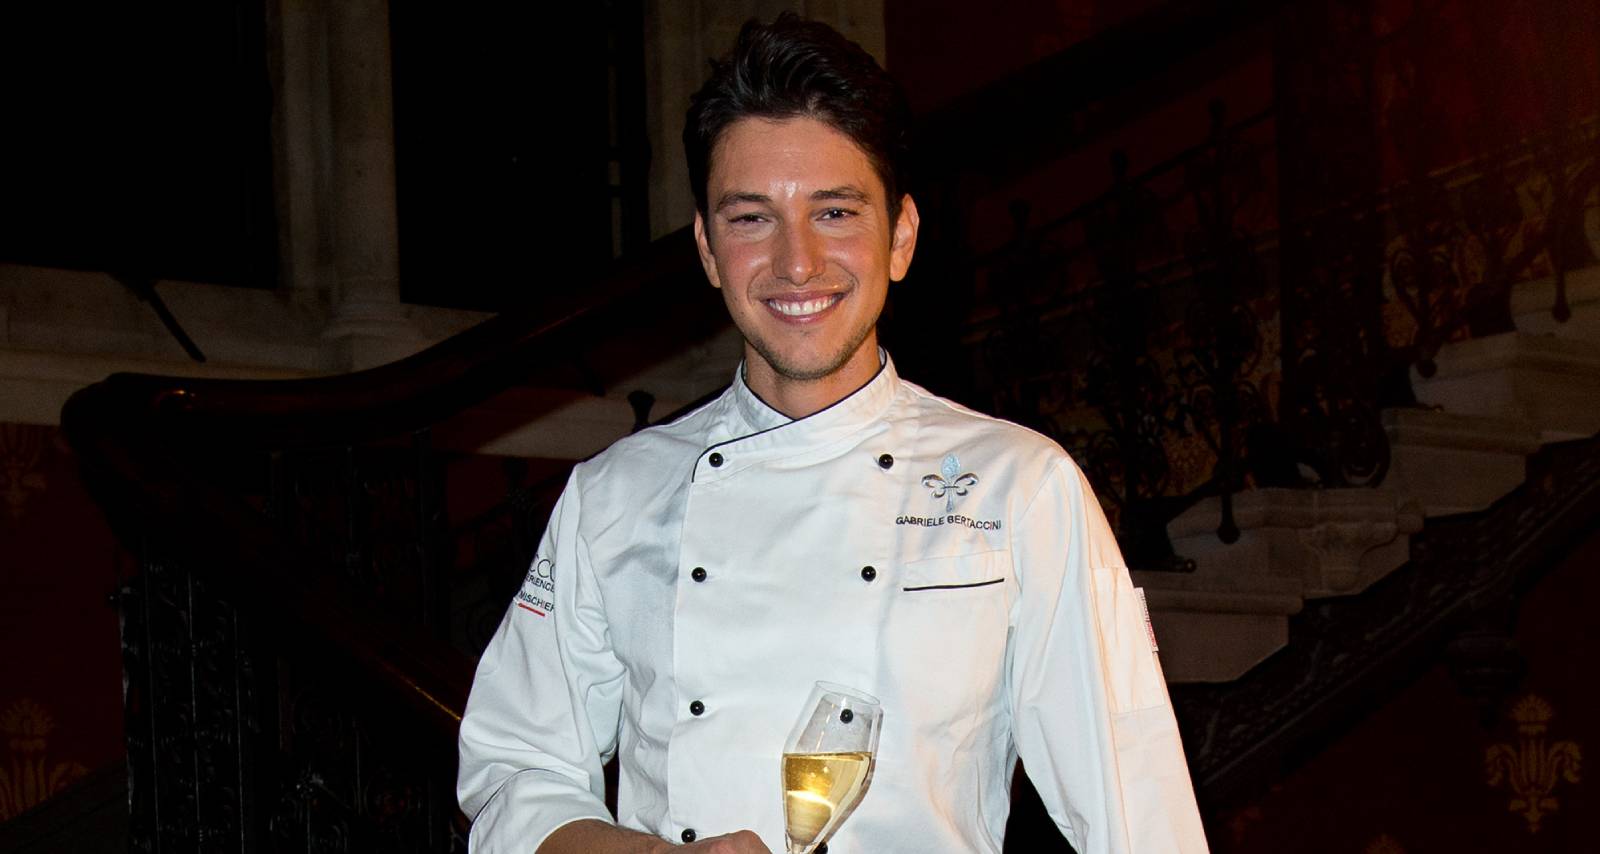 Gabriele Bertaccini Wiki, Age, Education and Facts About the Chef on Netflix’s “Say I Do”